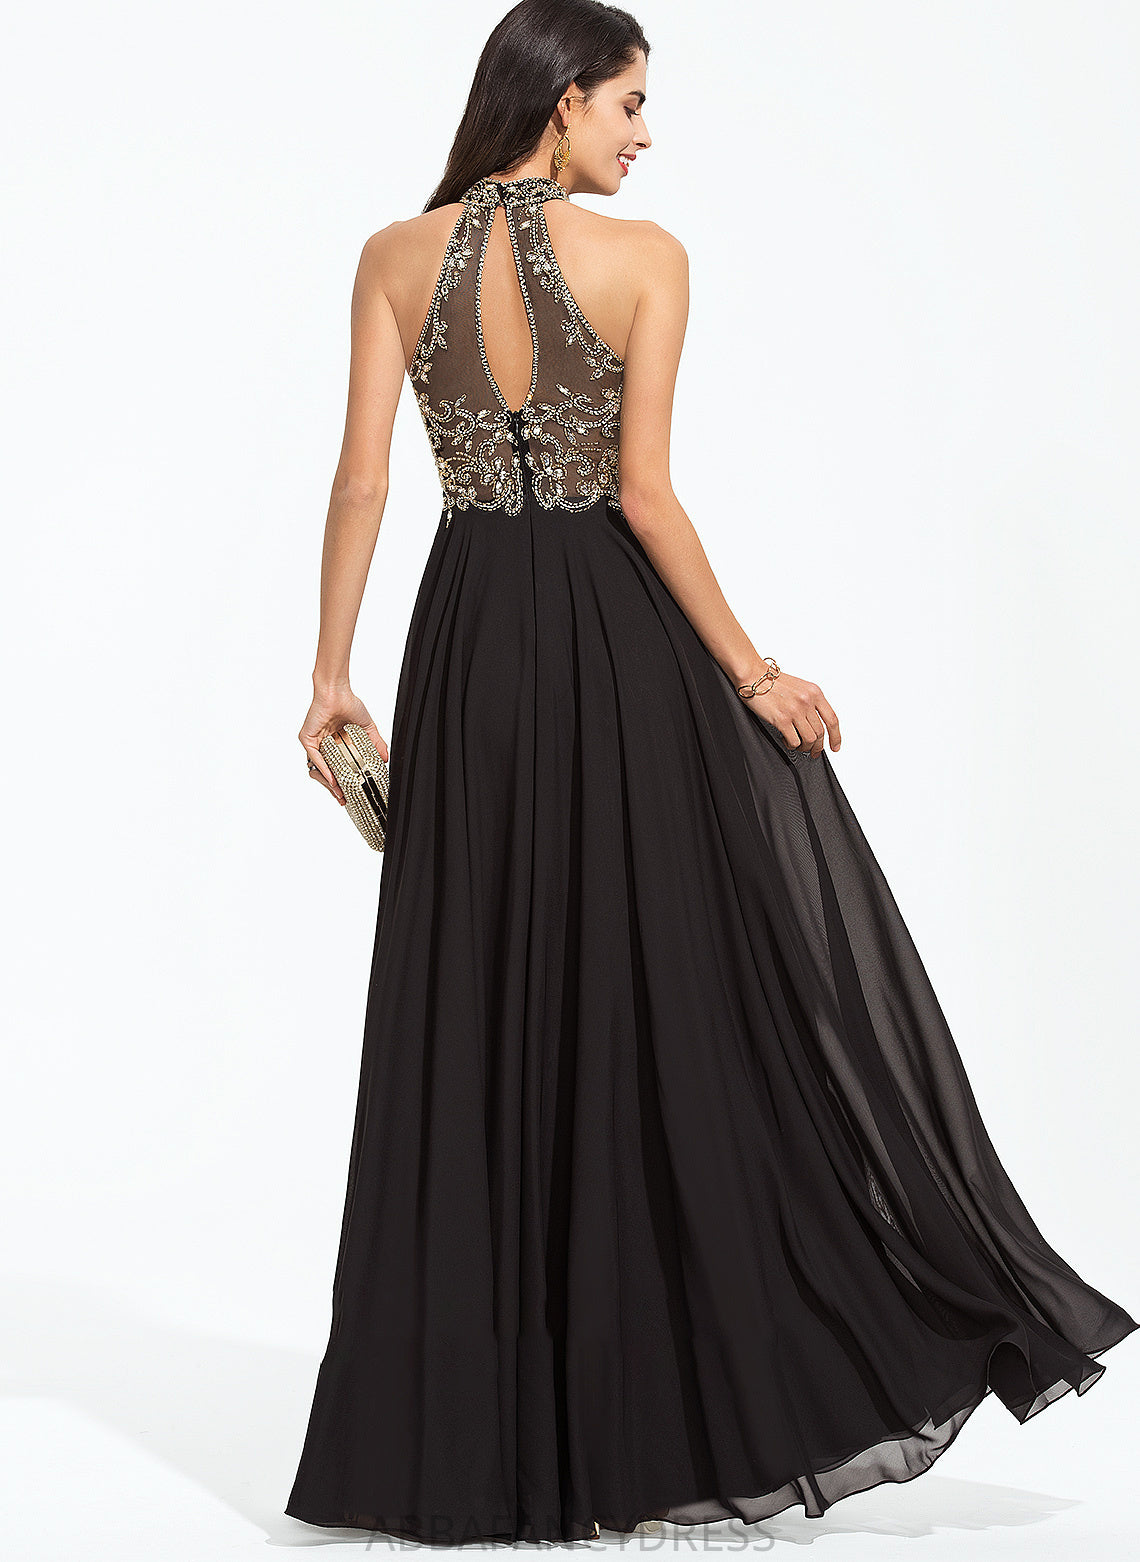 Sequins Mckenna High Prom Dresses Chiffon Neck With Floor-Length A-Line Beading